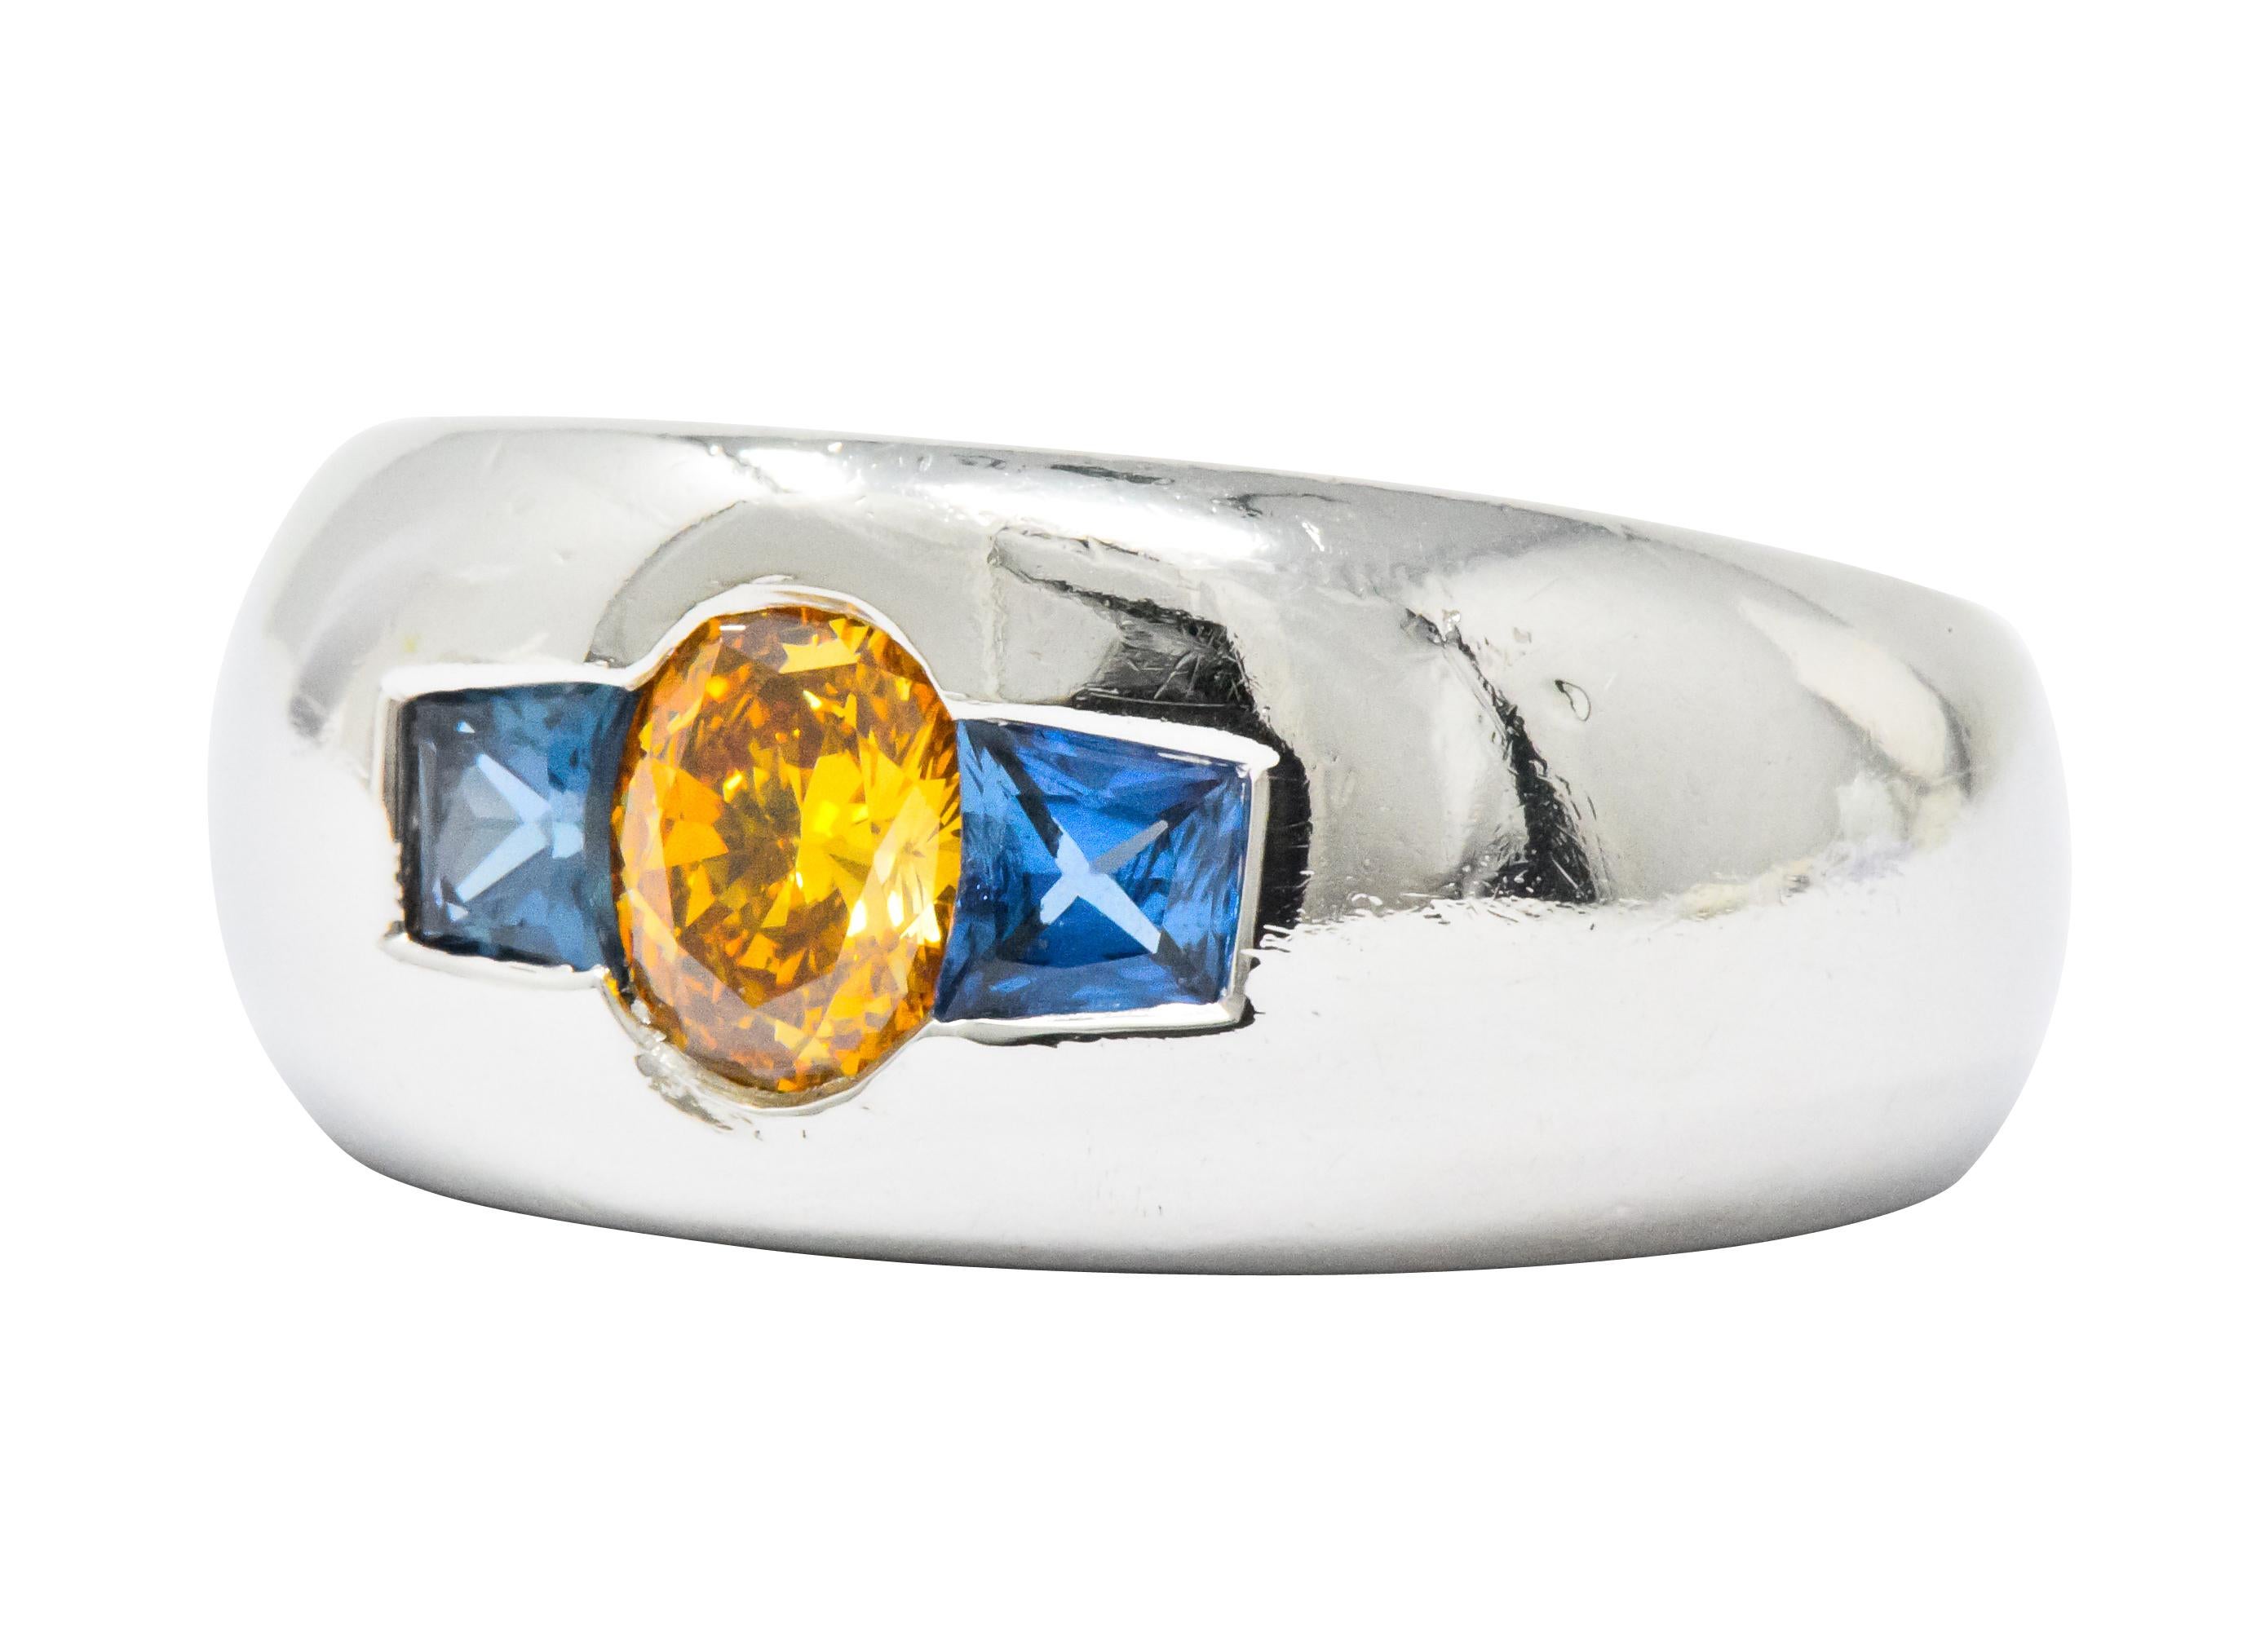 A wide, flush set three stone band ring with a domed curvature and bright finish

Centering an oval cut fancy colored diamond weighing 0.59 carat, intense yellow-orange in color with VS1 clarity

Flanked flushly by two calibre cut sapphires weighing